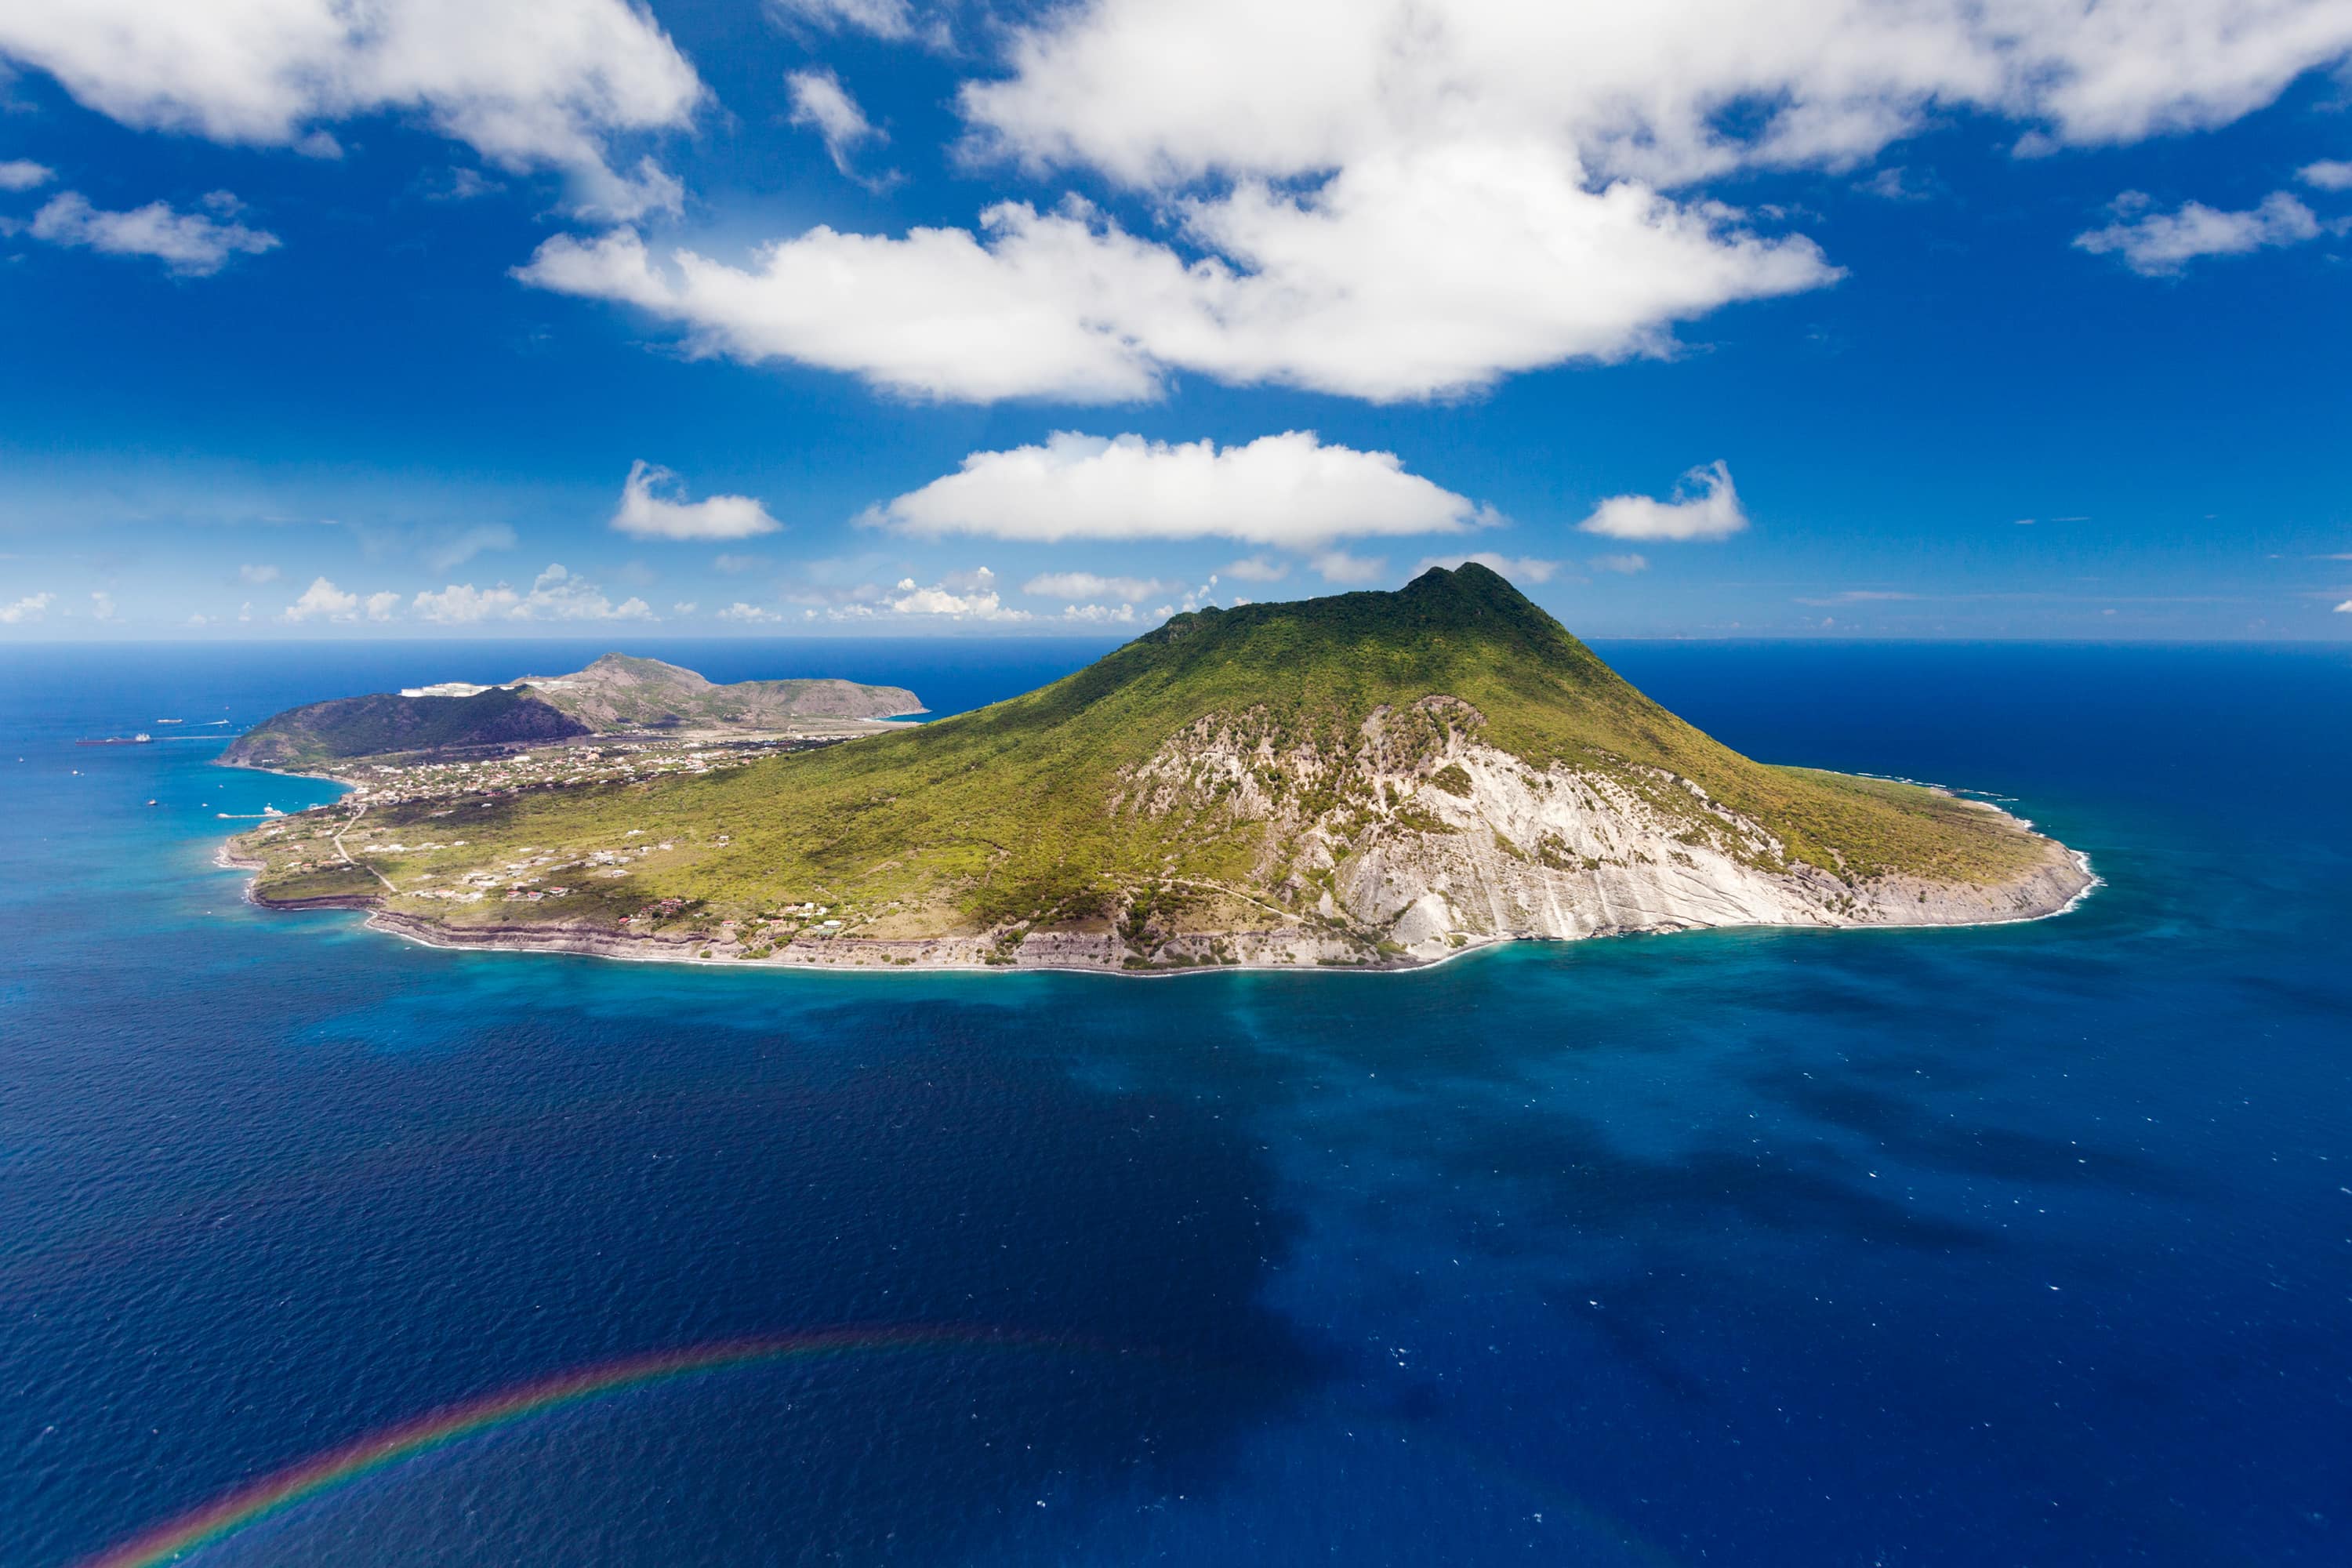 Statia from the sky | Credit: Cees Timmers